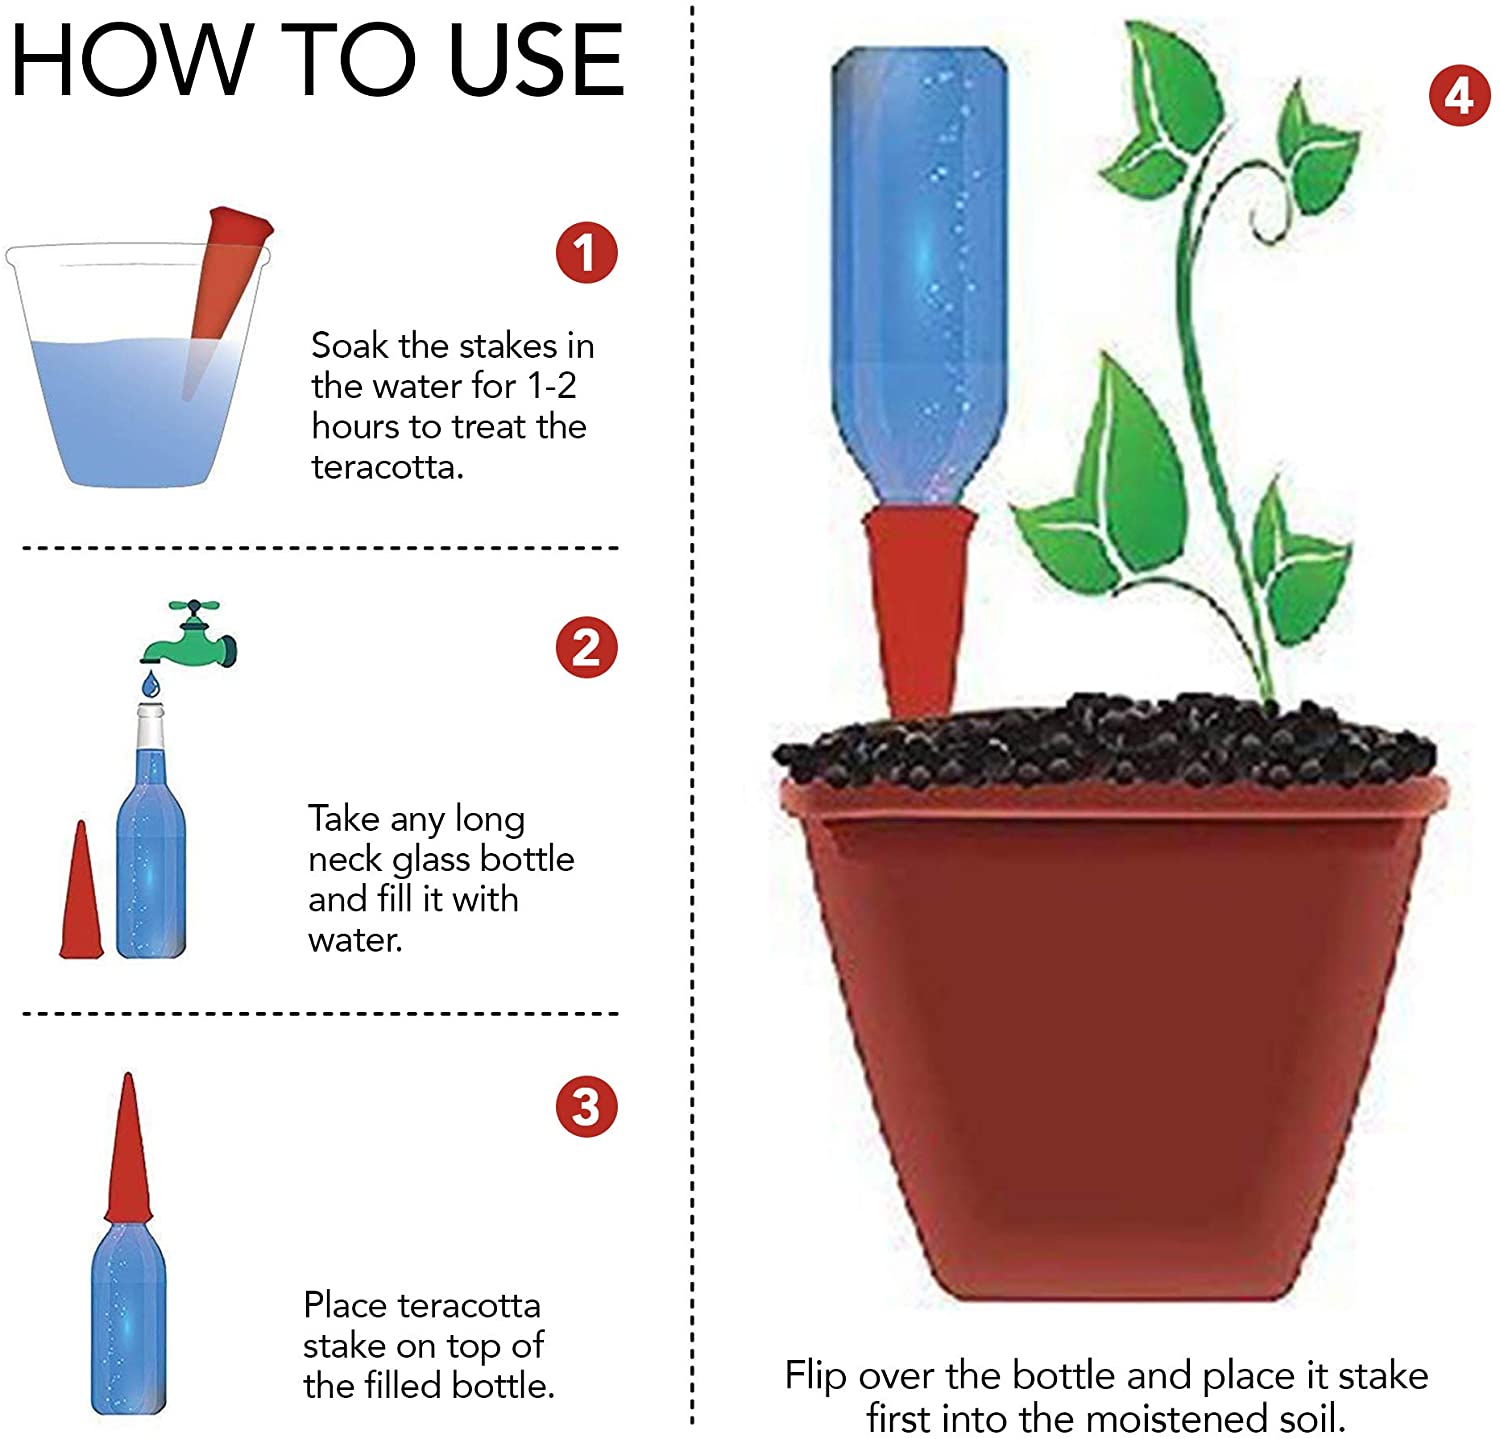 how to set up a self-watering plant straw system - The Plant Project